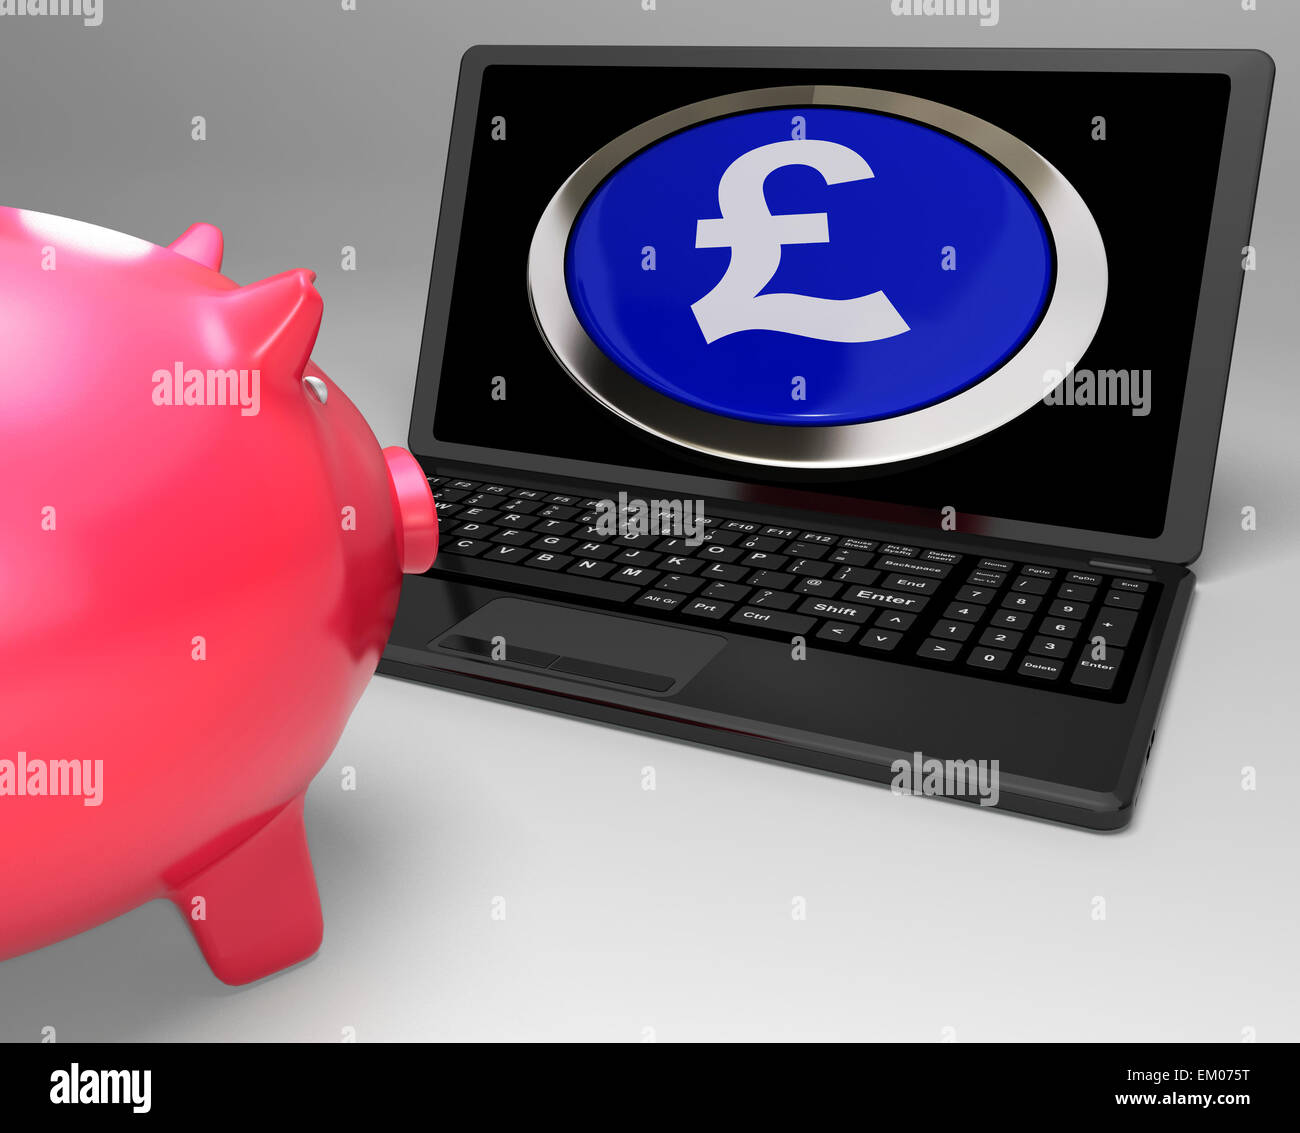 Pound Symbol Button On Laptop Shows Earnings Stock Photo